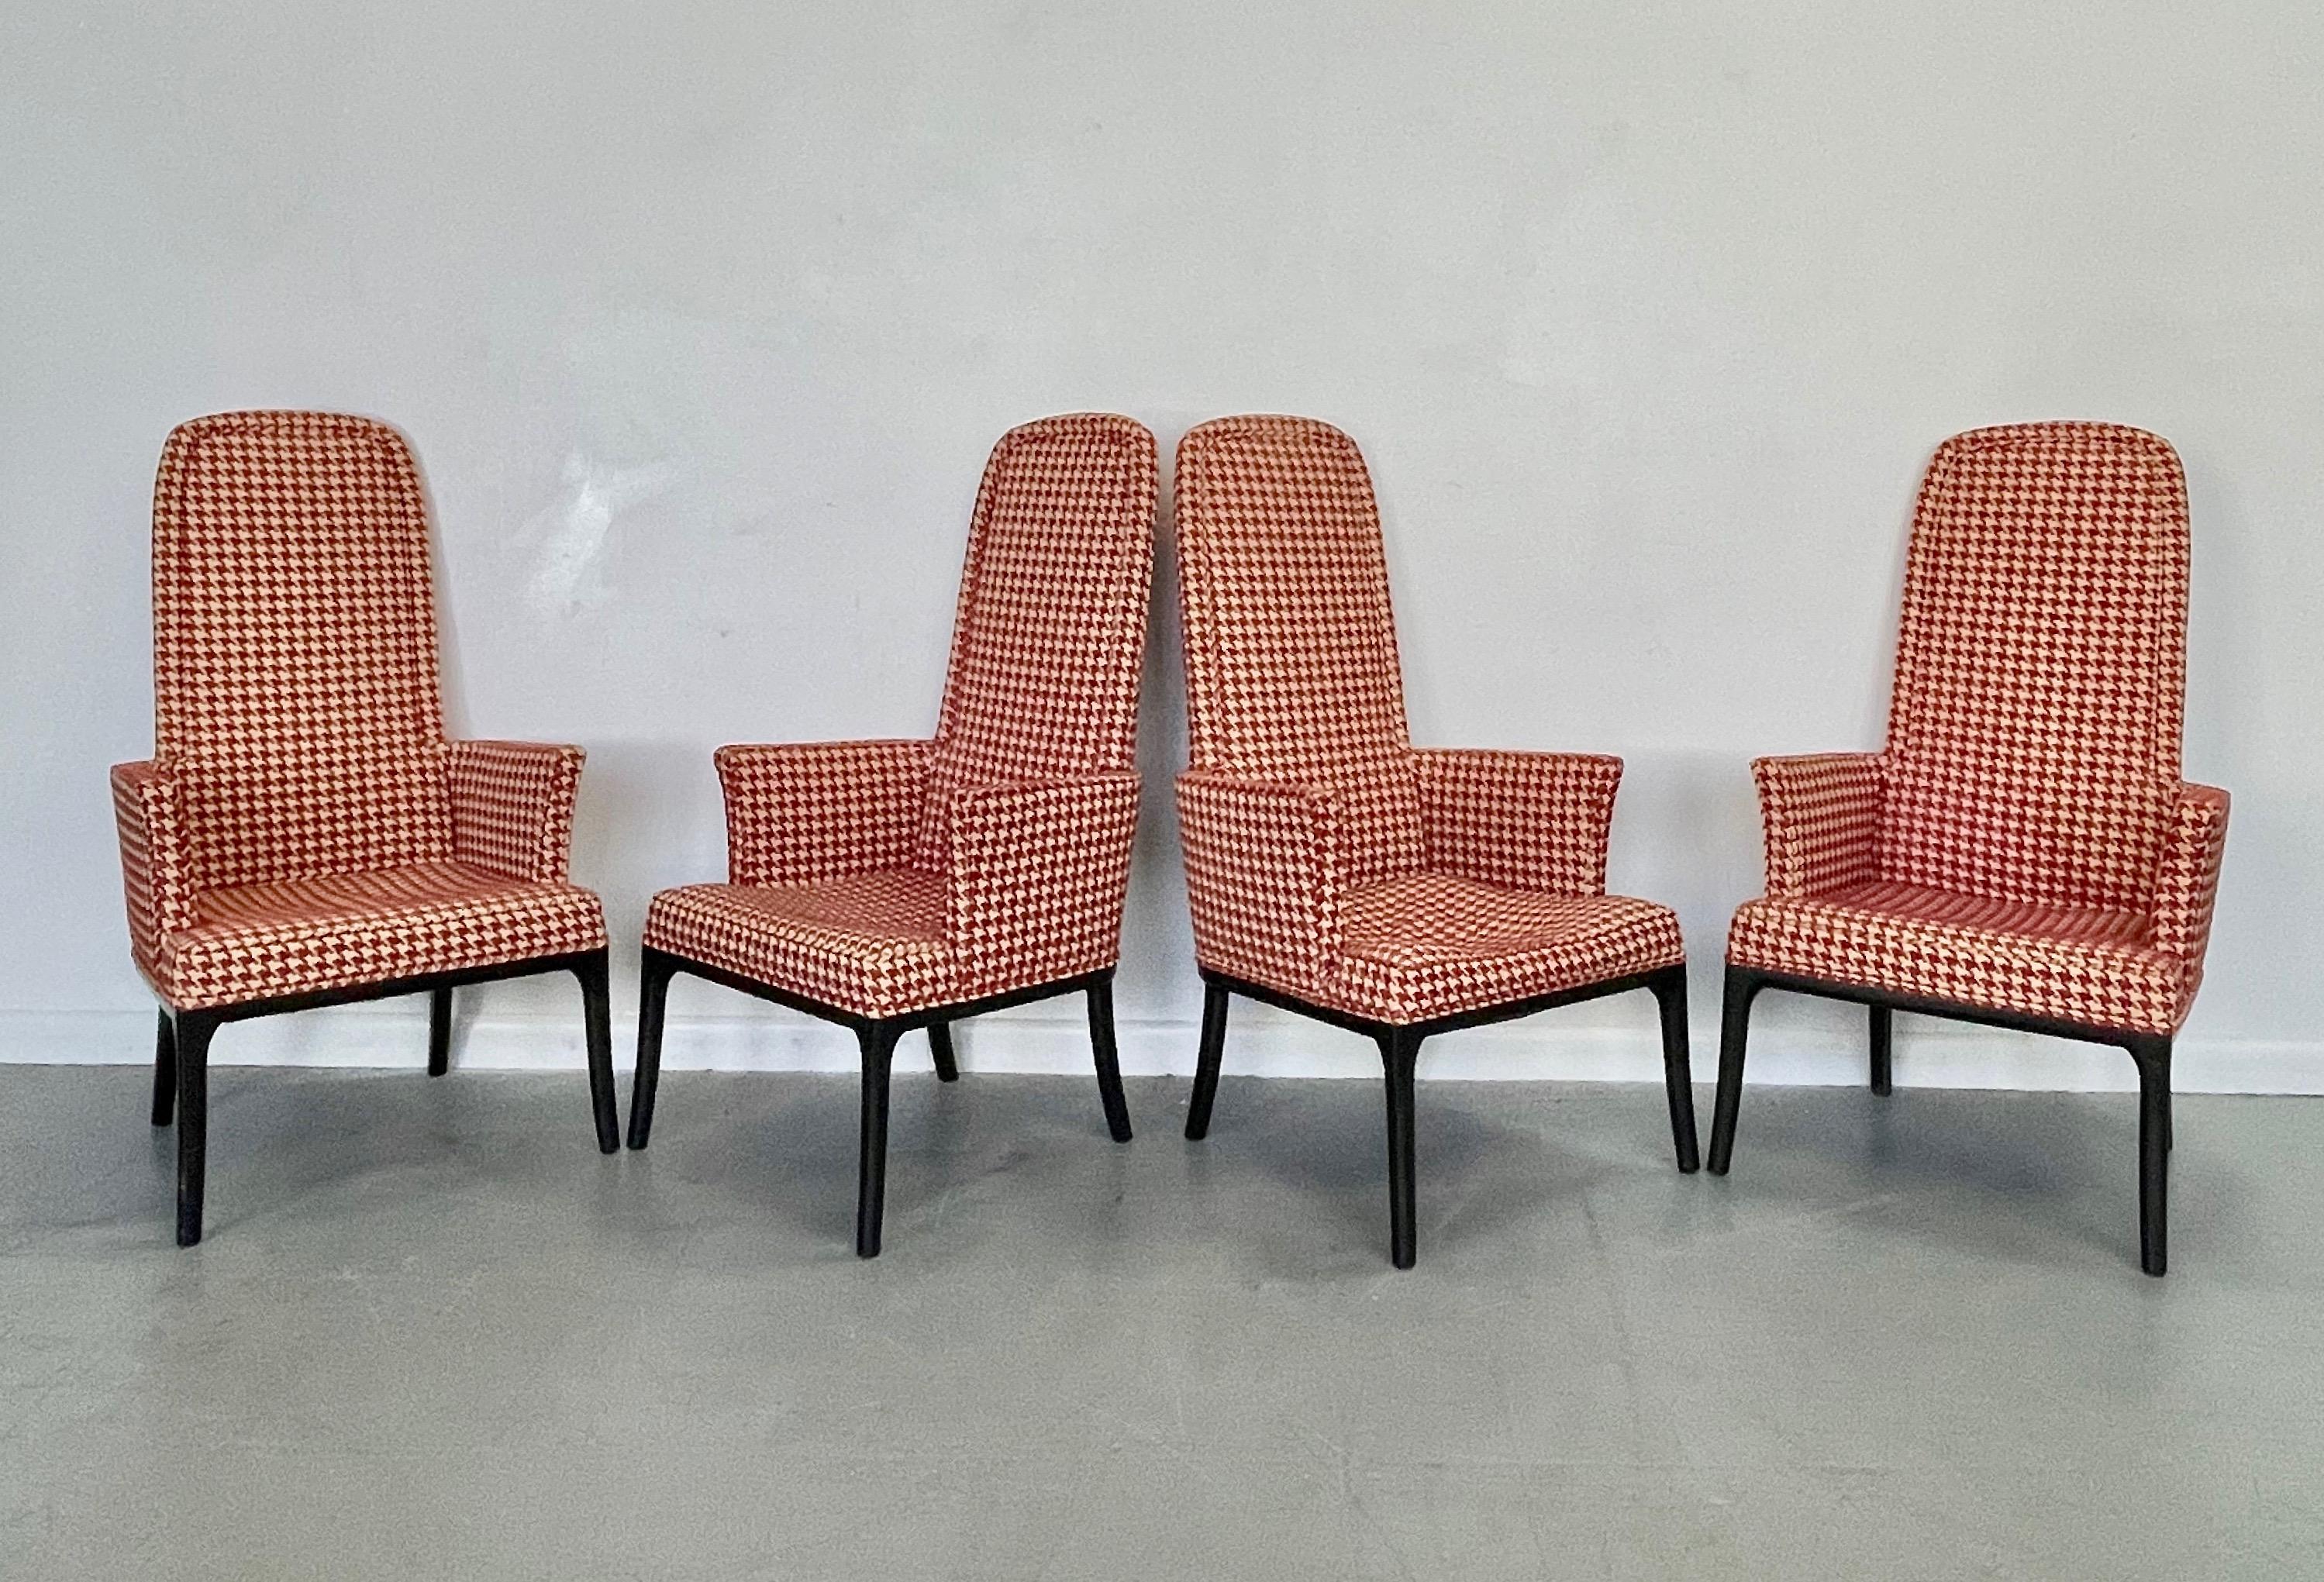 Set of Four High Back Armchair-Dining Chair by Erwin Lambeth for Tomlinson In Good Condition For Sale In Philadelphia, PA